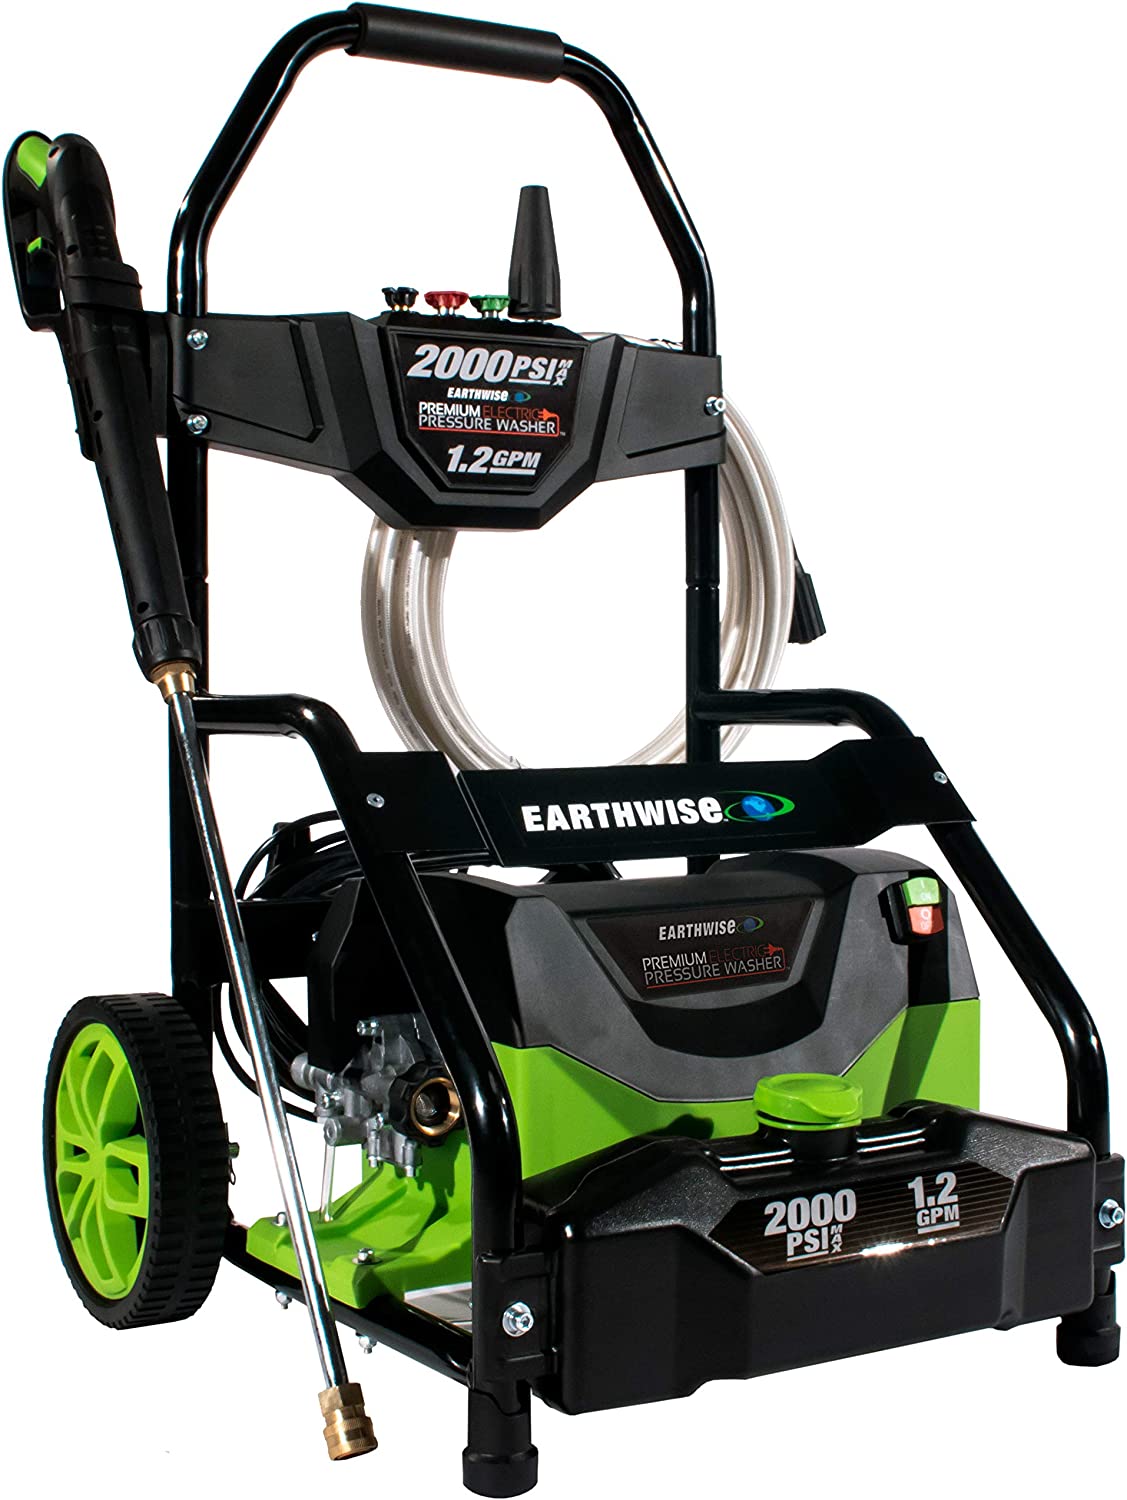 Earthwise Power Tools by ALM 2000 PSI 13-Amp 120V Corded Pressure Washer